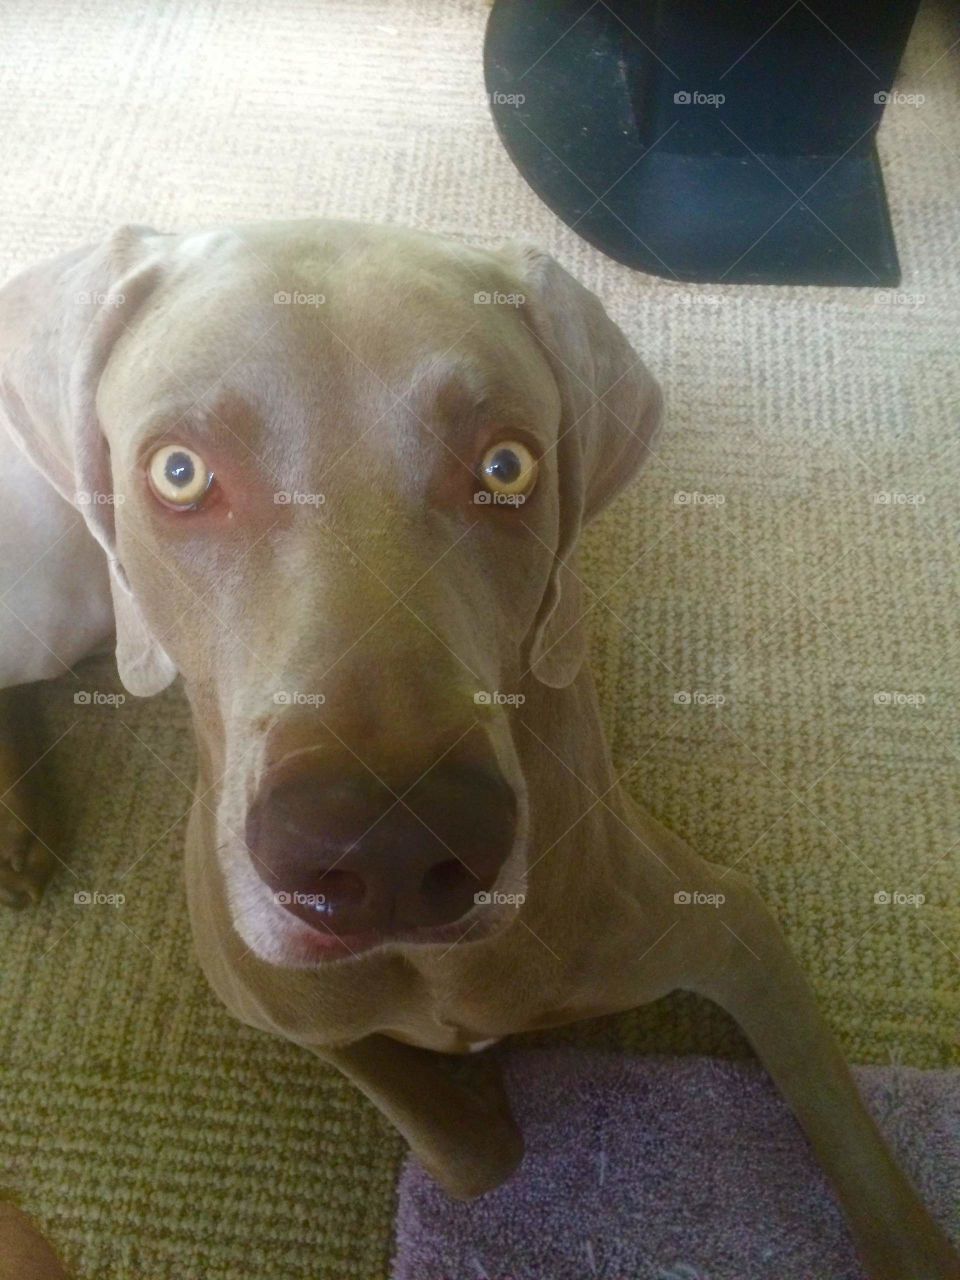 Samson the Weimaraner with his “Who me?” expression. 